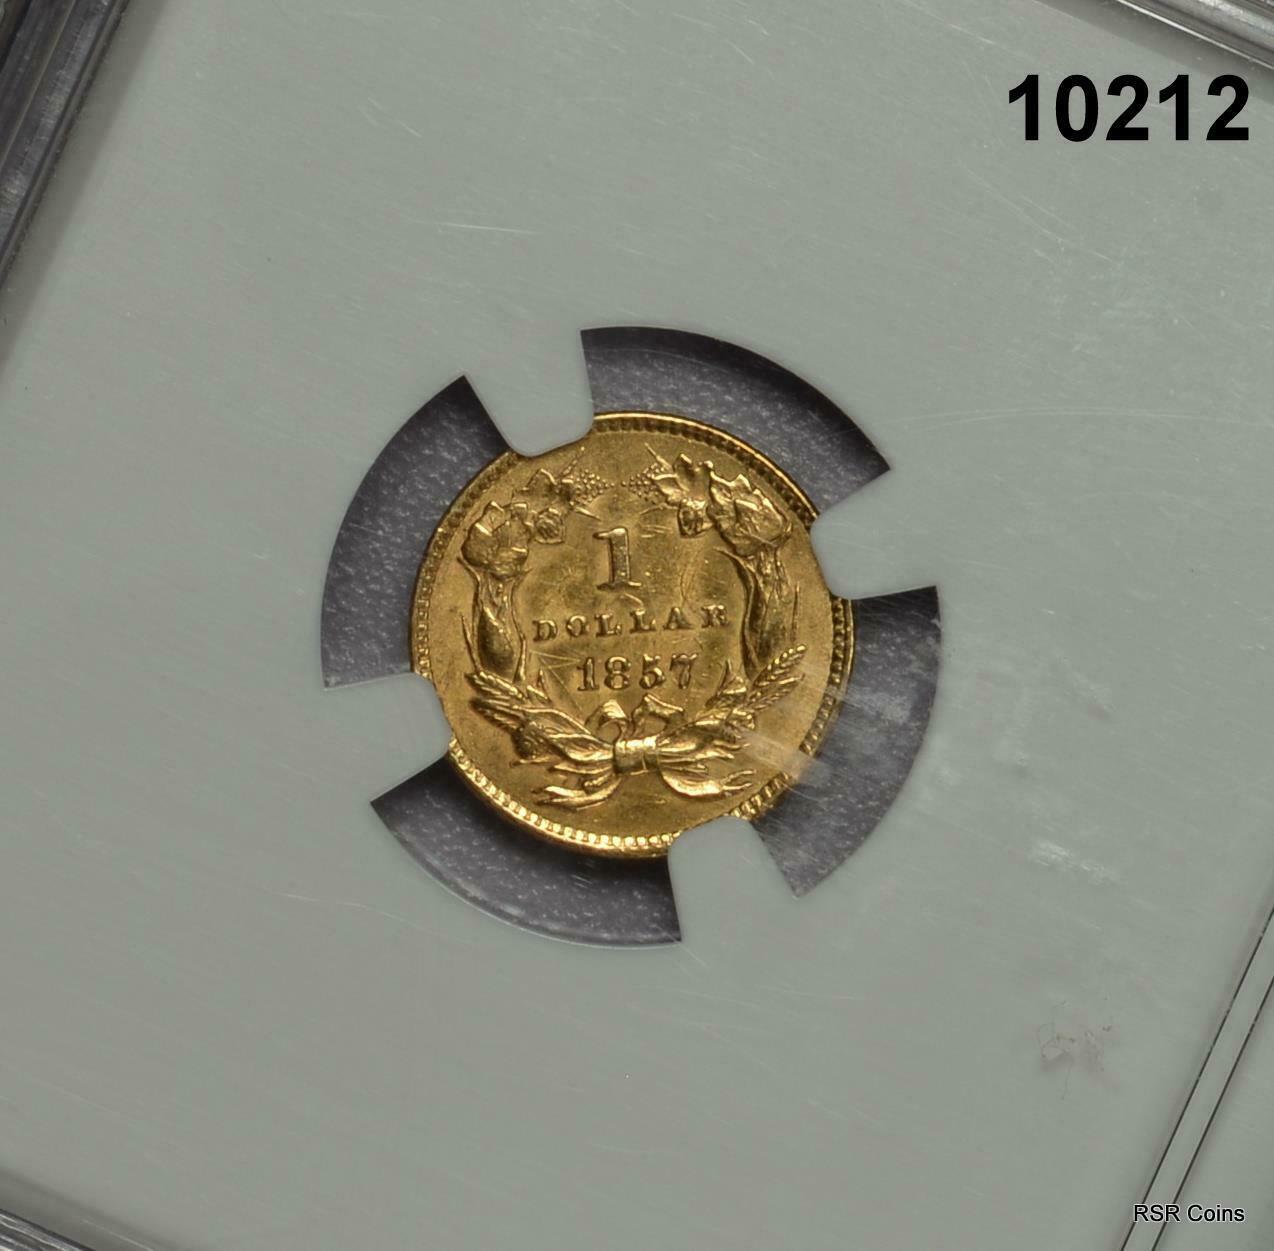 1857 GOLD $1 INDIAN NGC CERTIFIED UNC. DETAILS IMPROP CLEANED LOOKS NICE #10212